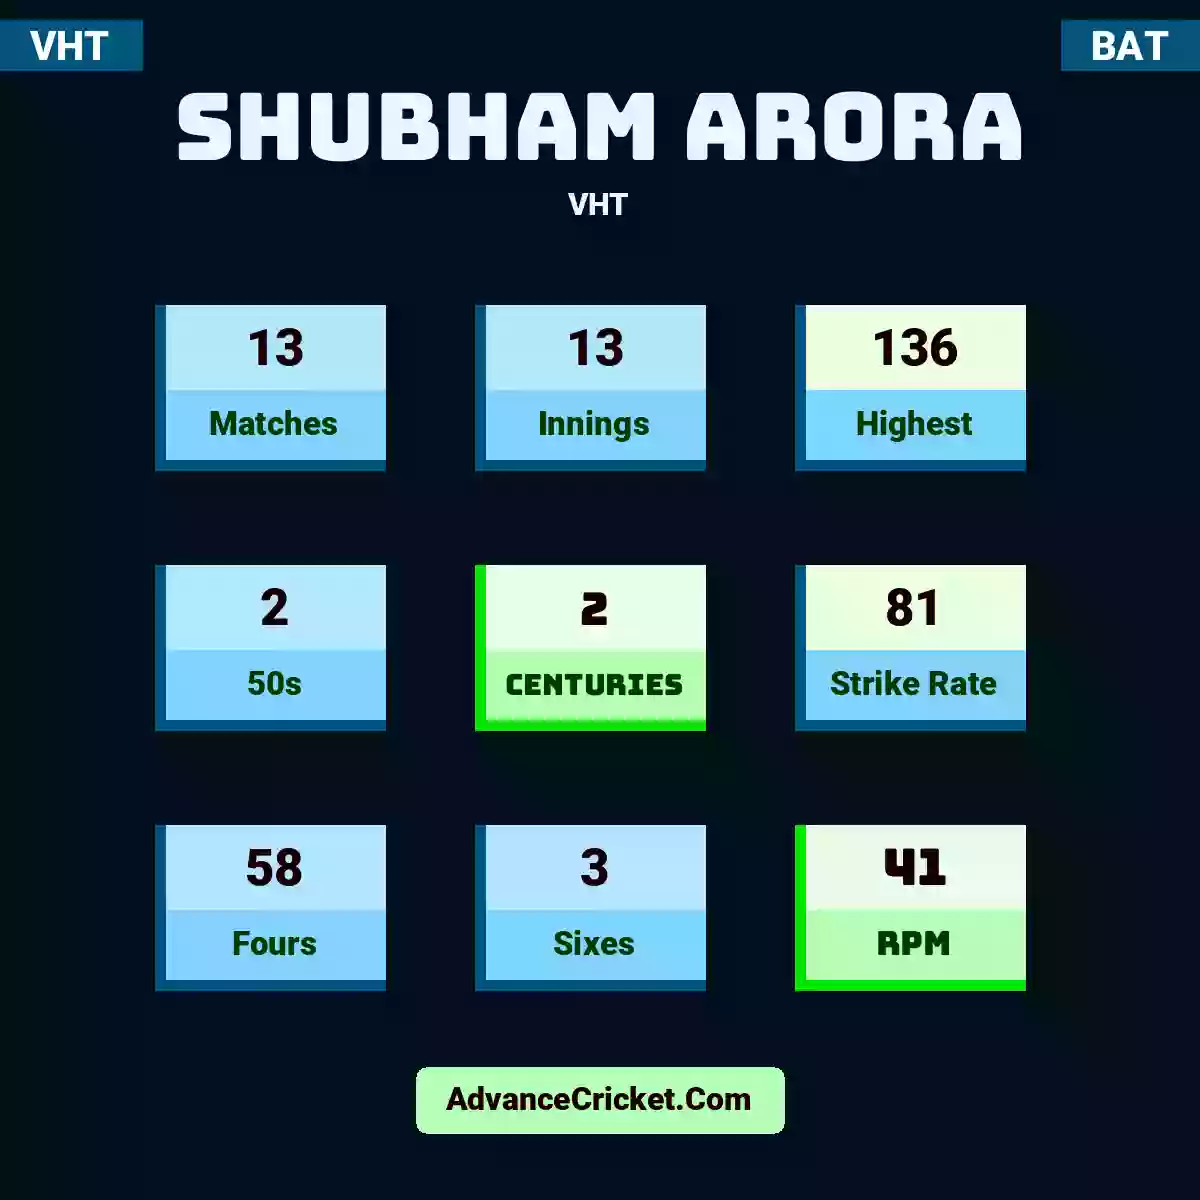 Shubham Arora VHT , Shubham Arora played 13 matches, scored 136 runs as highest, 2 half-centuries, and 2 centuries, with a strike rate of 81. S.Arora hit 58 fours and 3 sixes, with an RPM of 41.